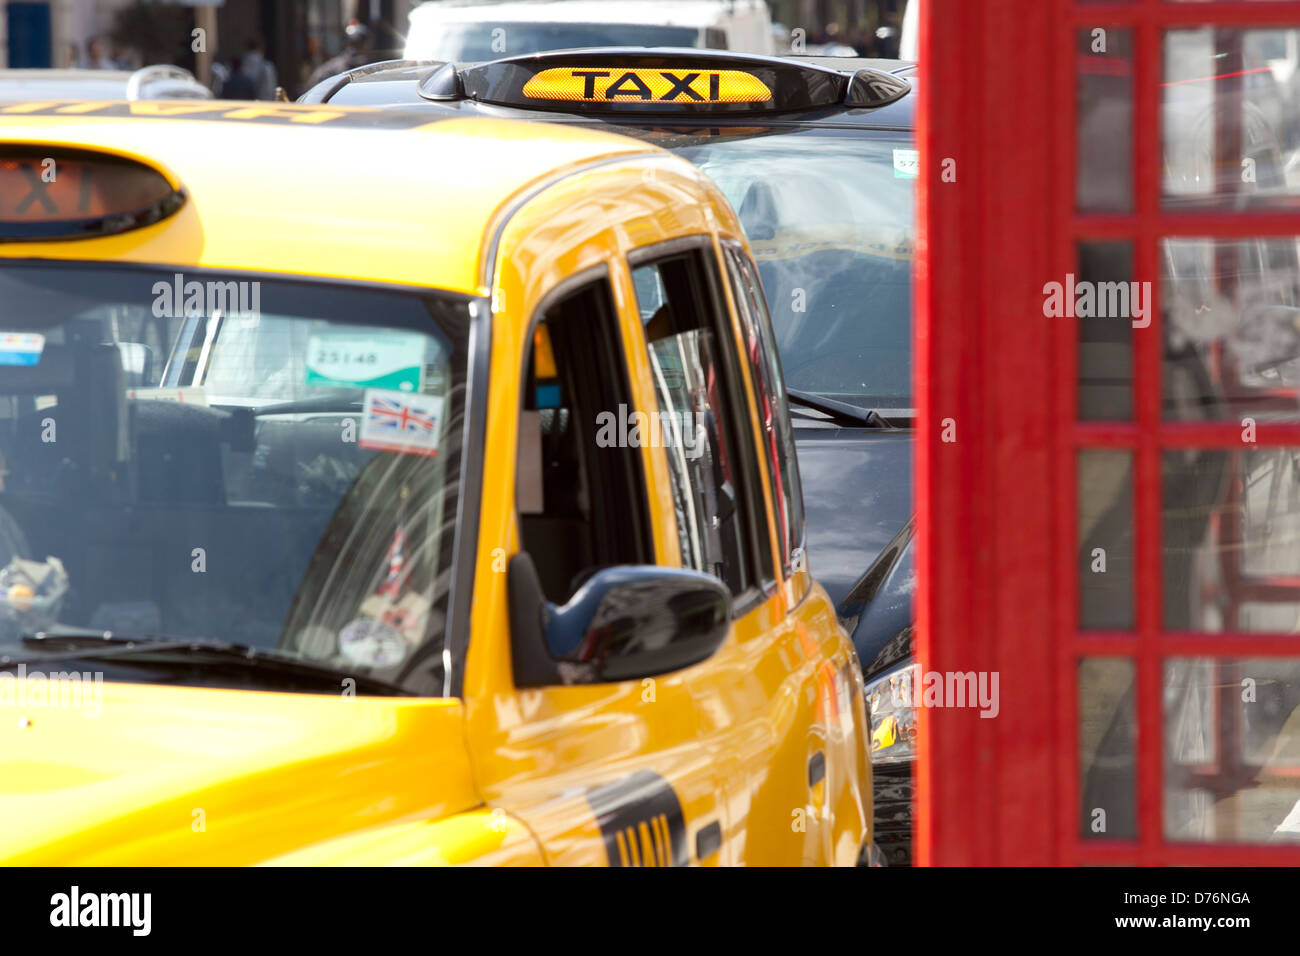 London Taxi London Taxi and phone box, Yellow Taxi, Taxi for hire, London Cabs, London, Taxi, London Street scene. Busy London. Stock Photo